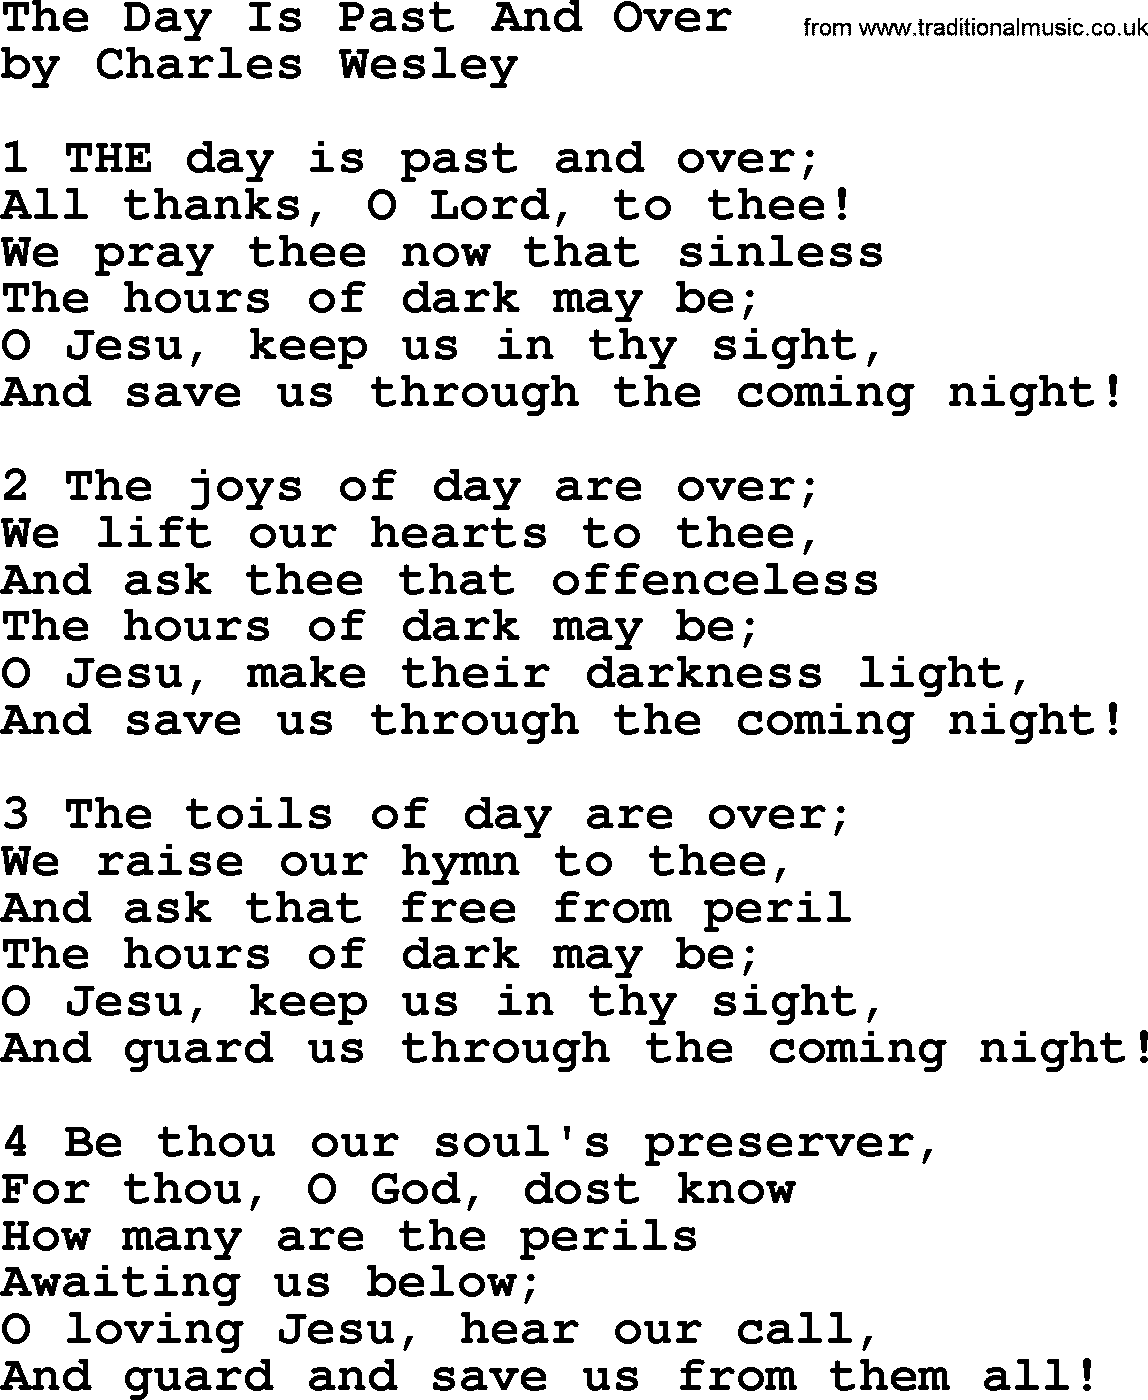 Charles Wesley hymn: The Day Is Past And Over, lyrics